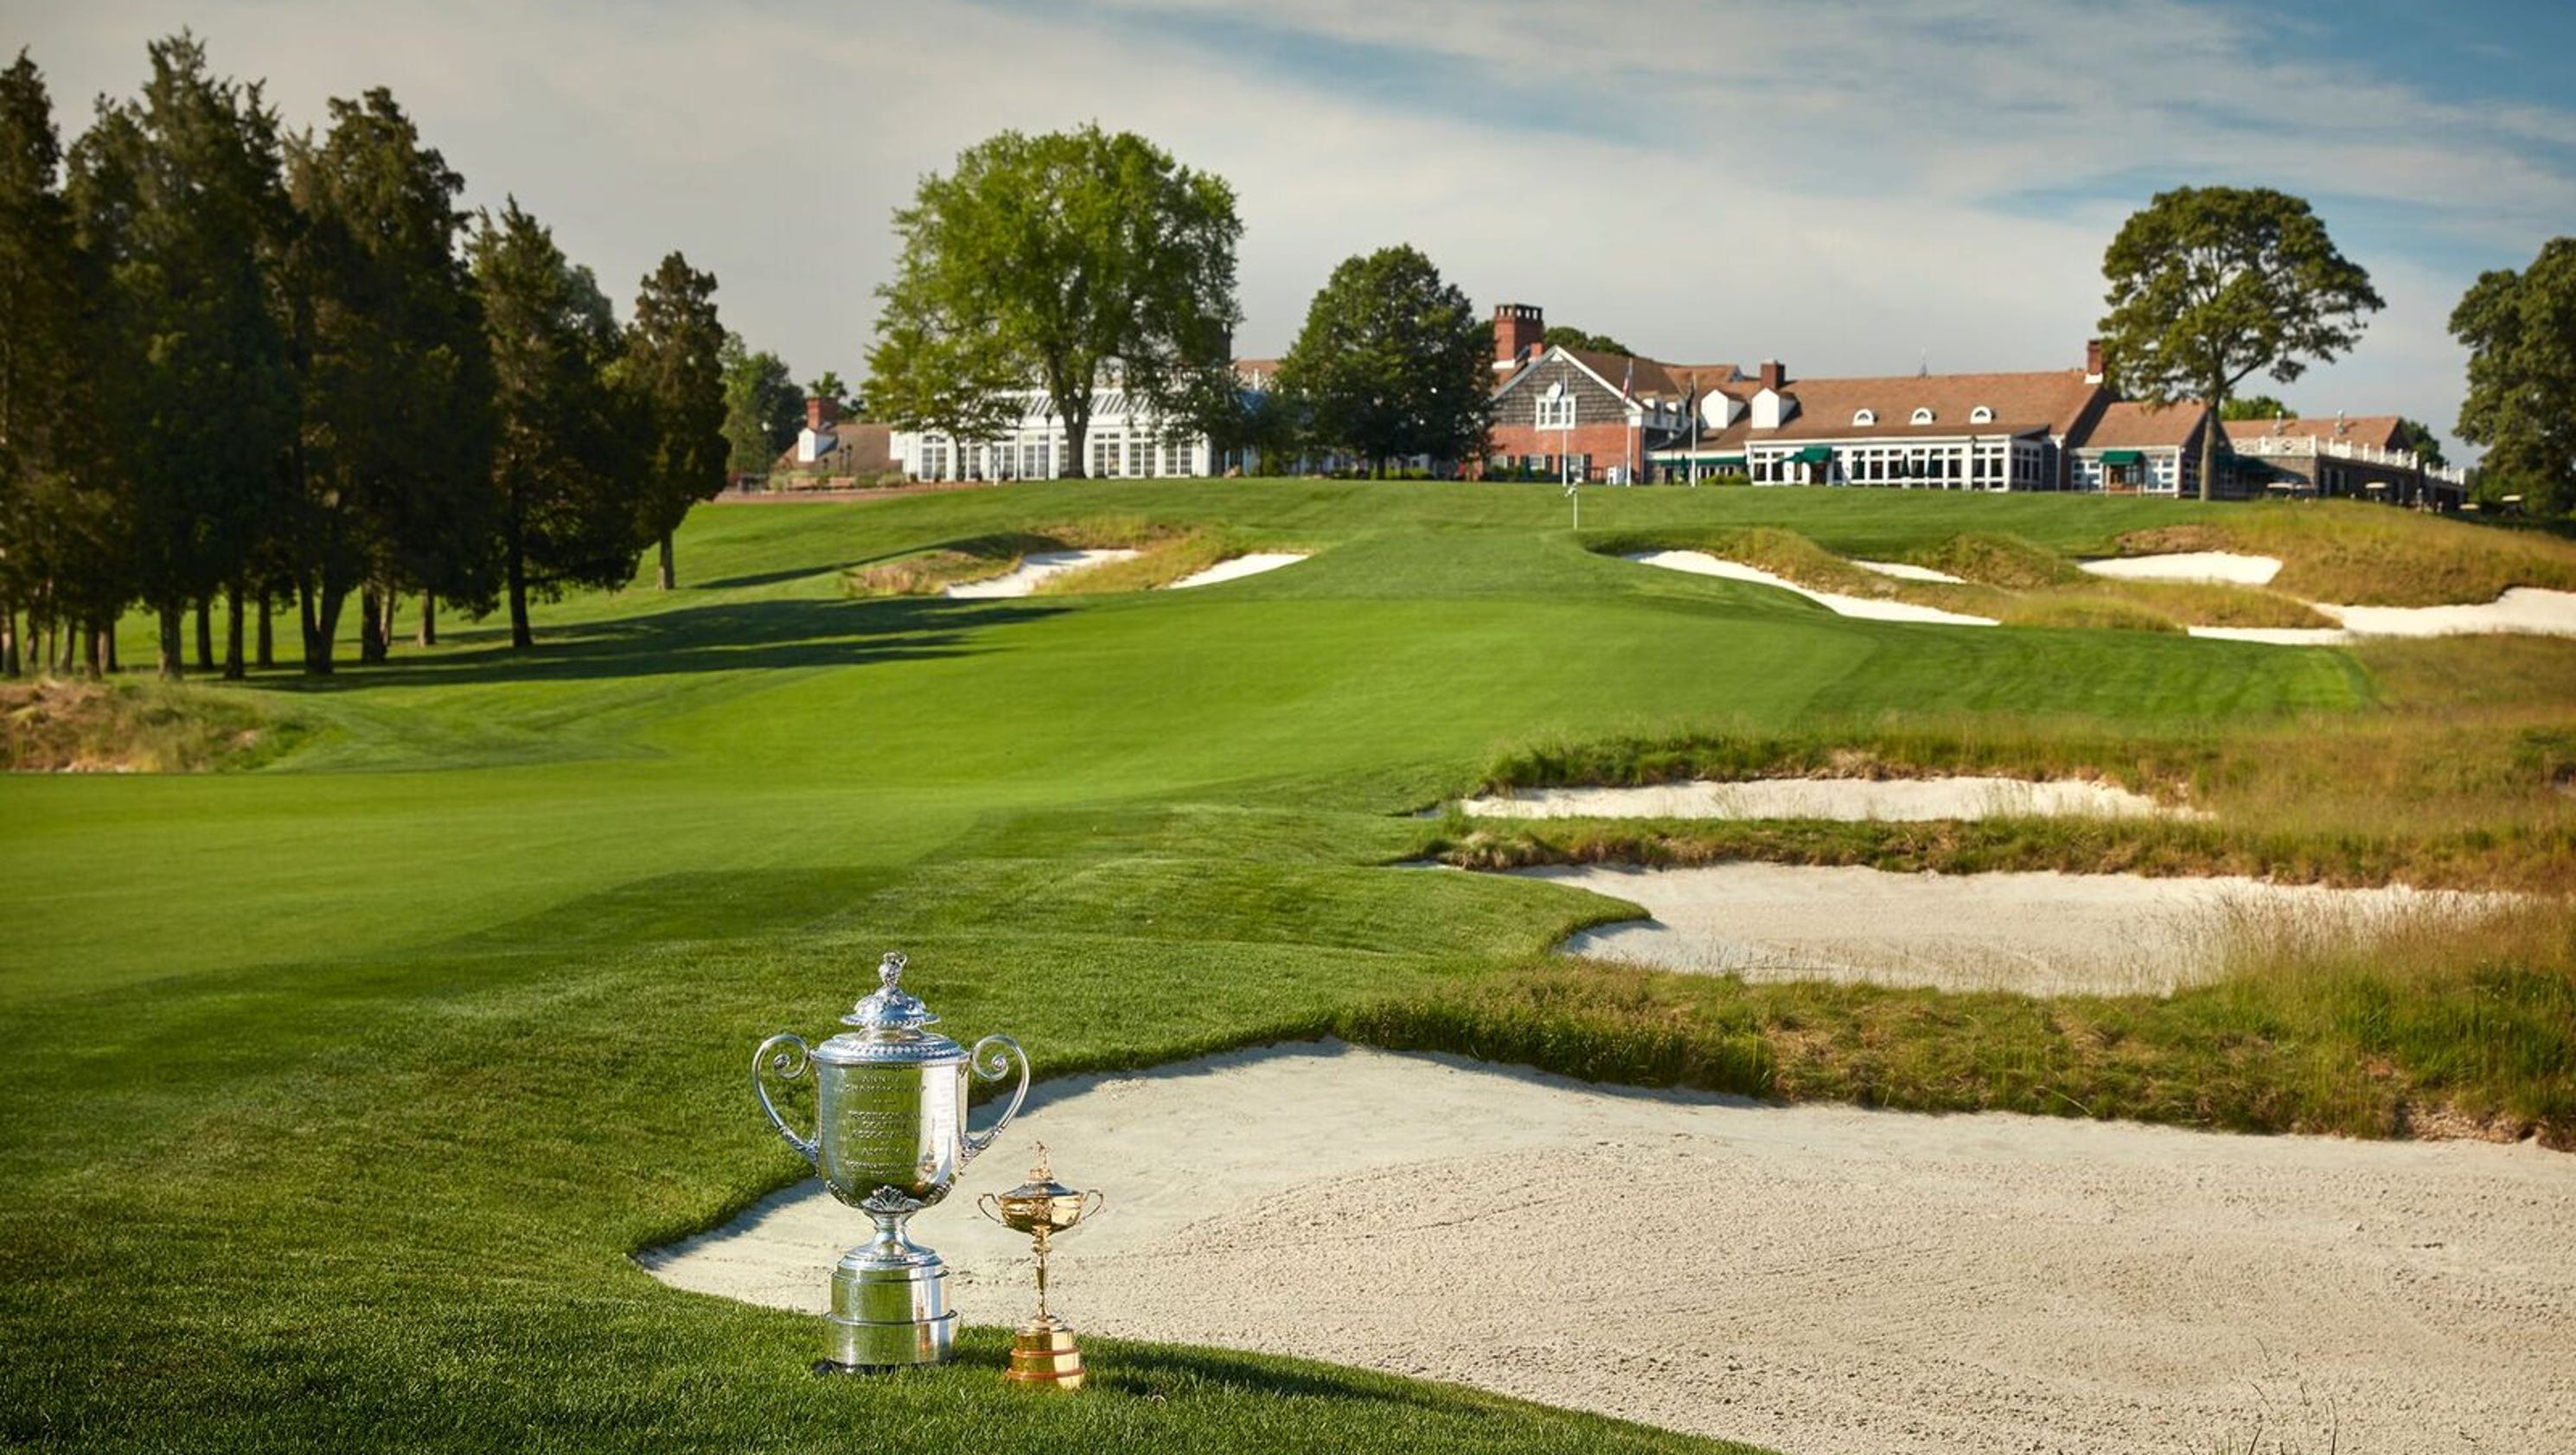 Golf: Volunteers needed for 2019 PGA Championship at Bethpage Black